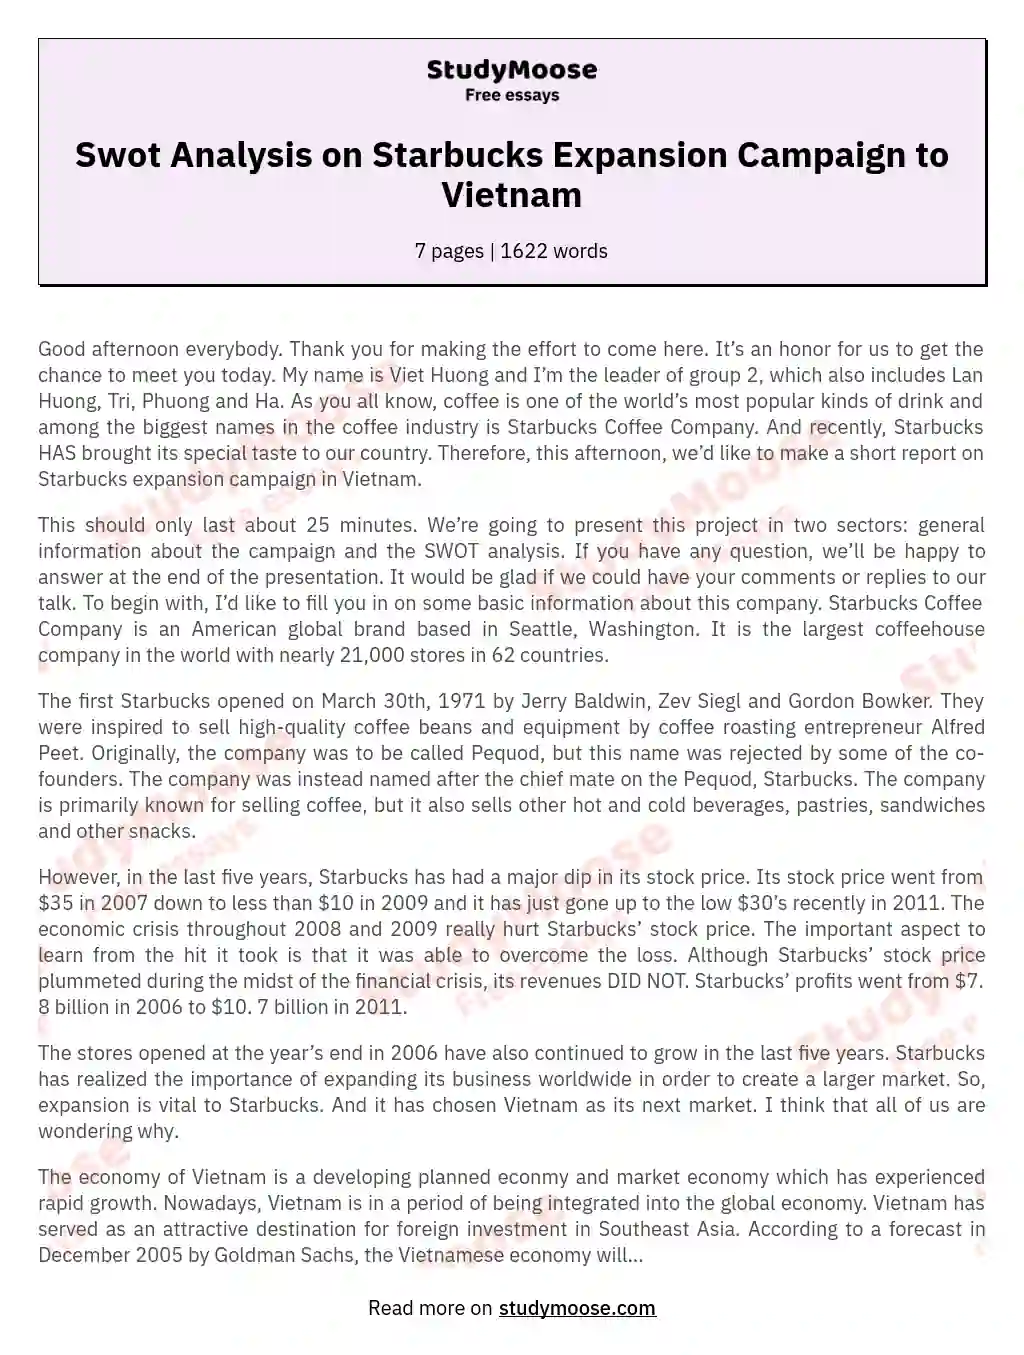 Swot Analysis on Starbucks Expansion Campaign to Vietnam essay